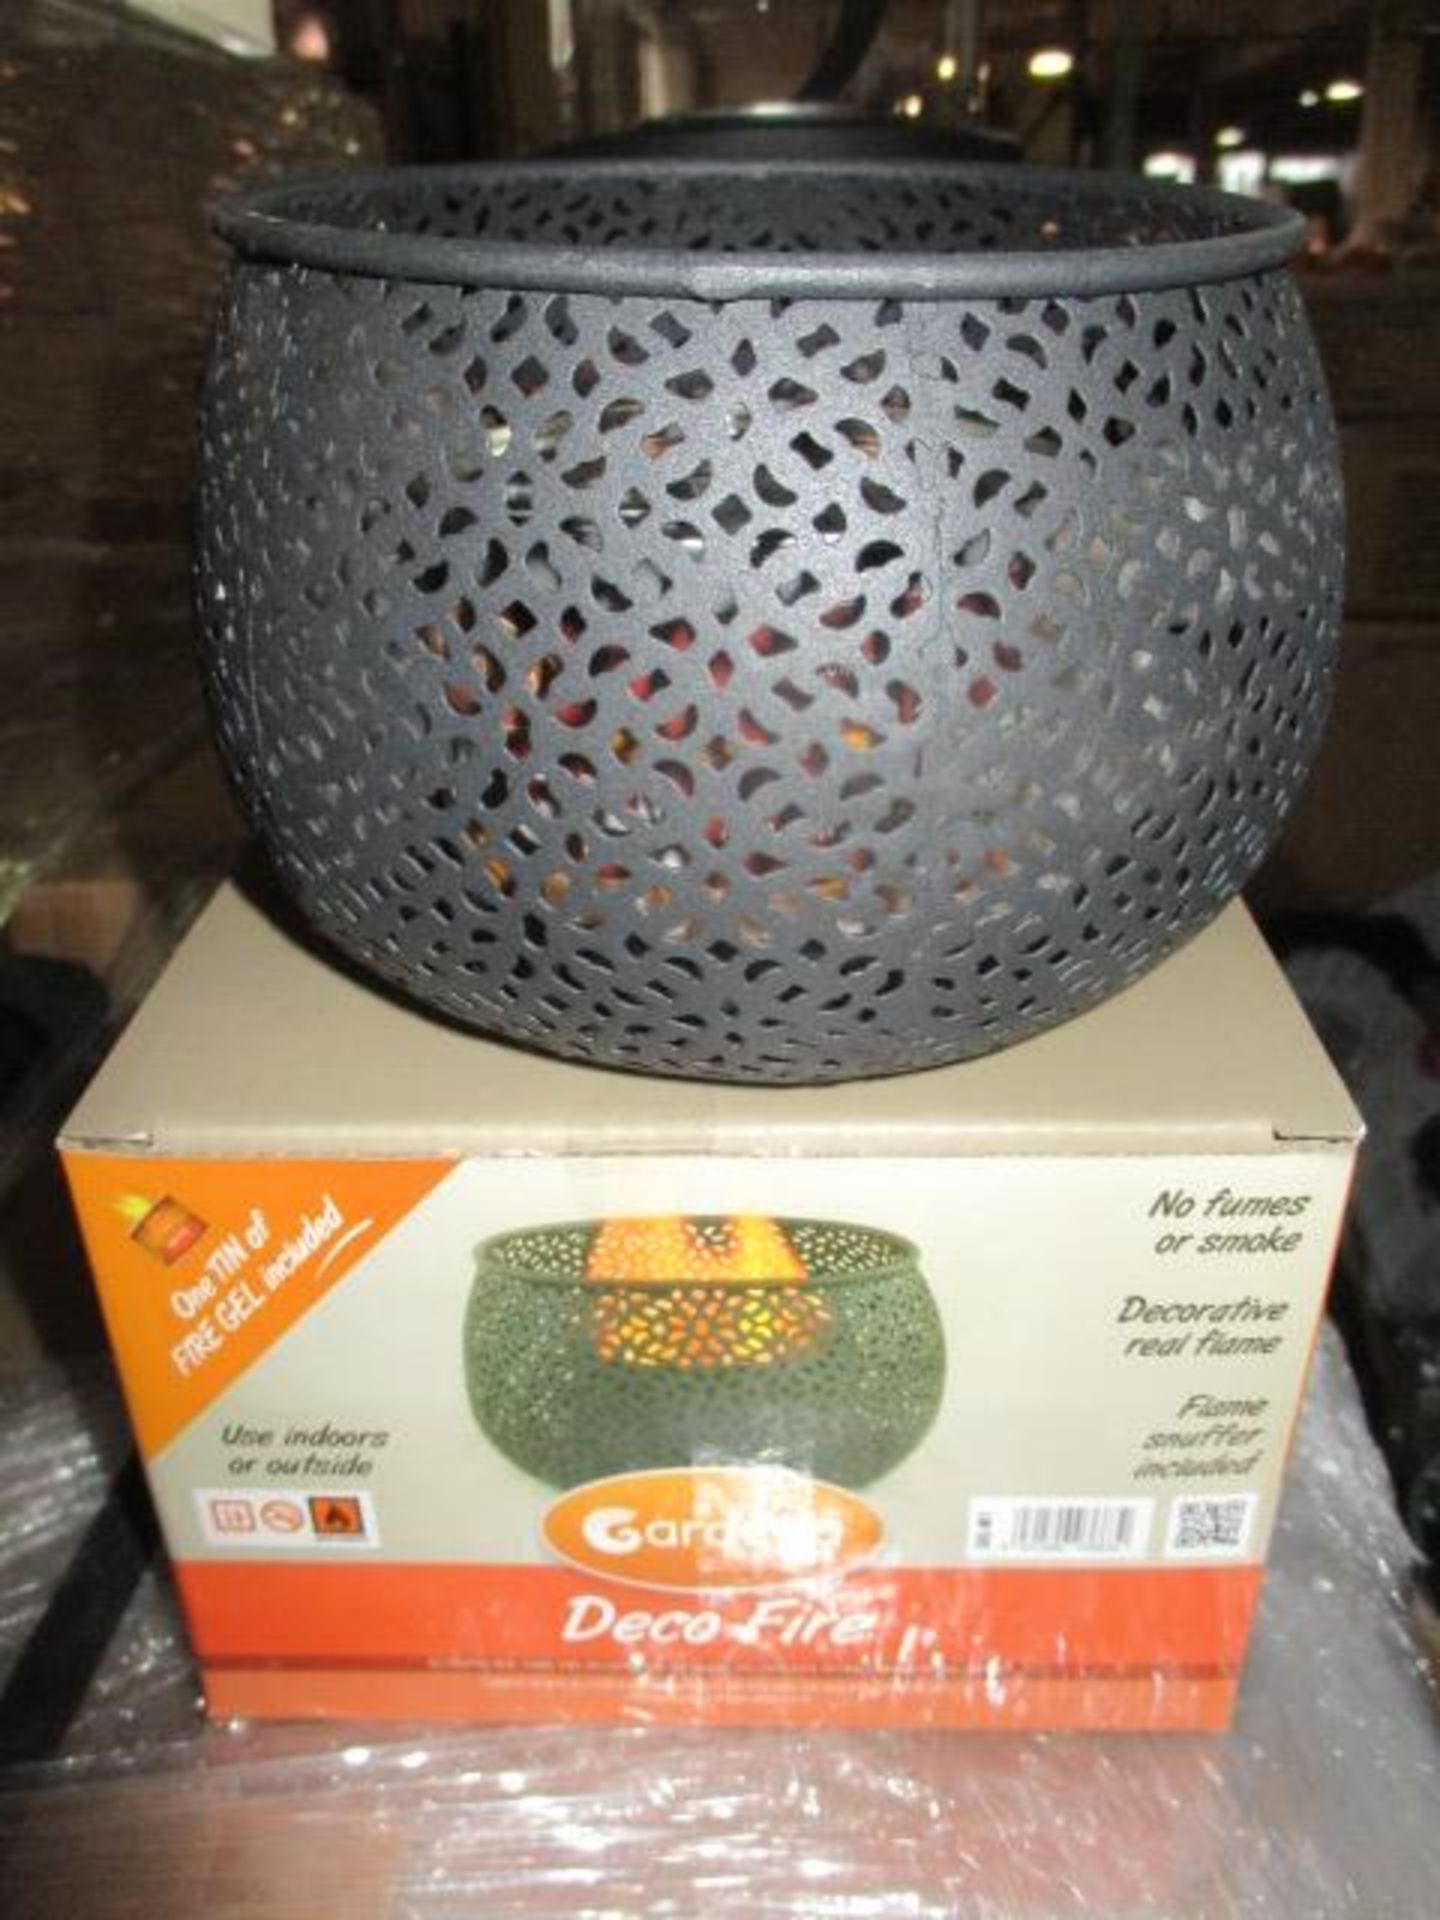 50pcs Brand new Sealed Gardeco outdoor/indoor Lace design Gel burner comes with tin of fuel brand ne